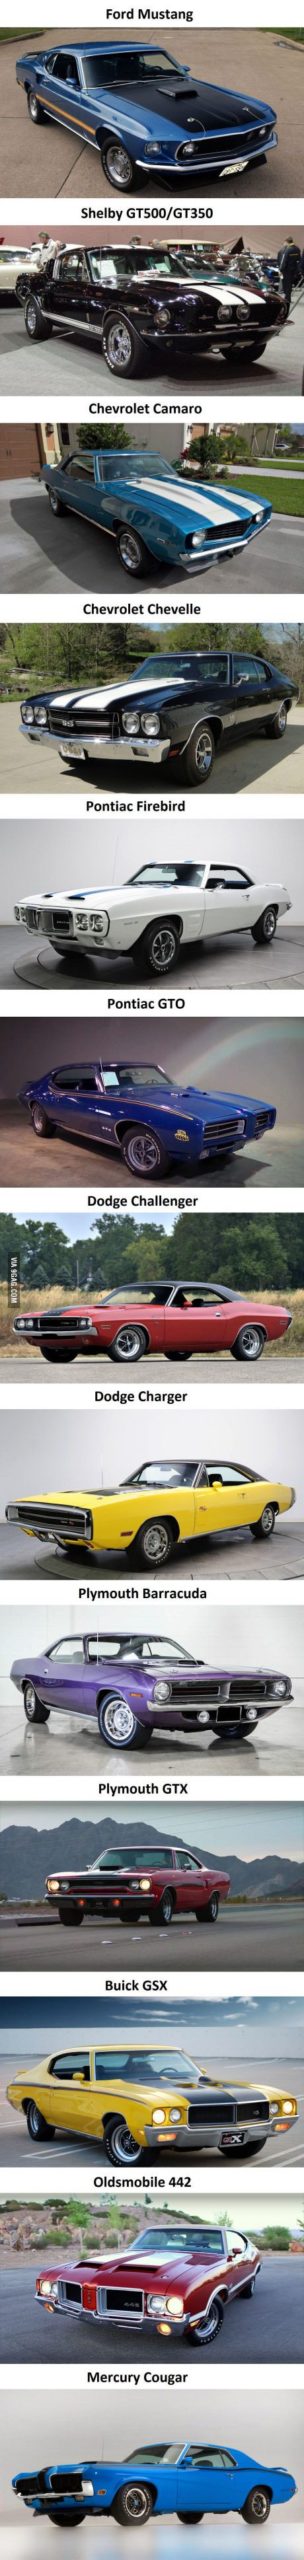 The Most Iconic Muscle Cars